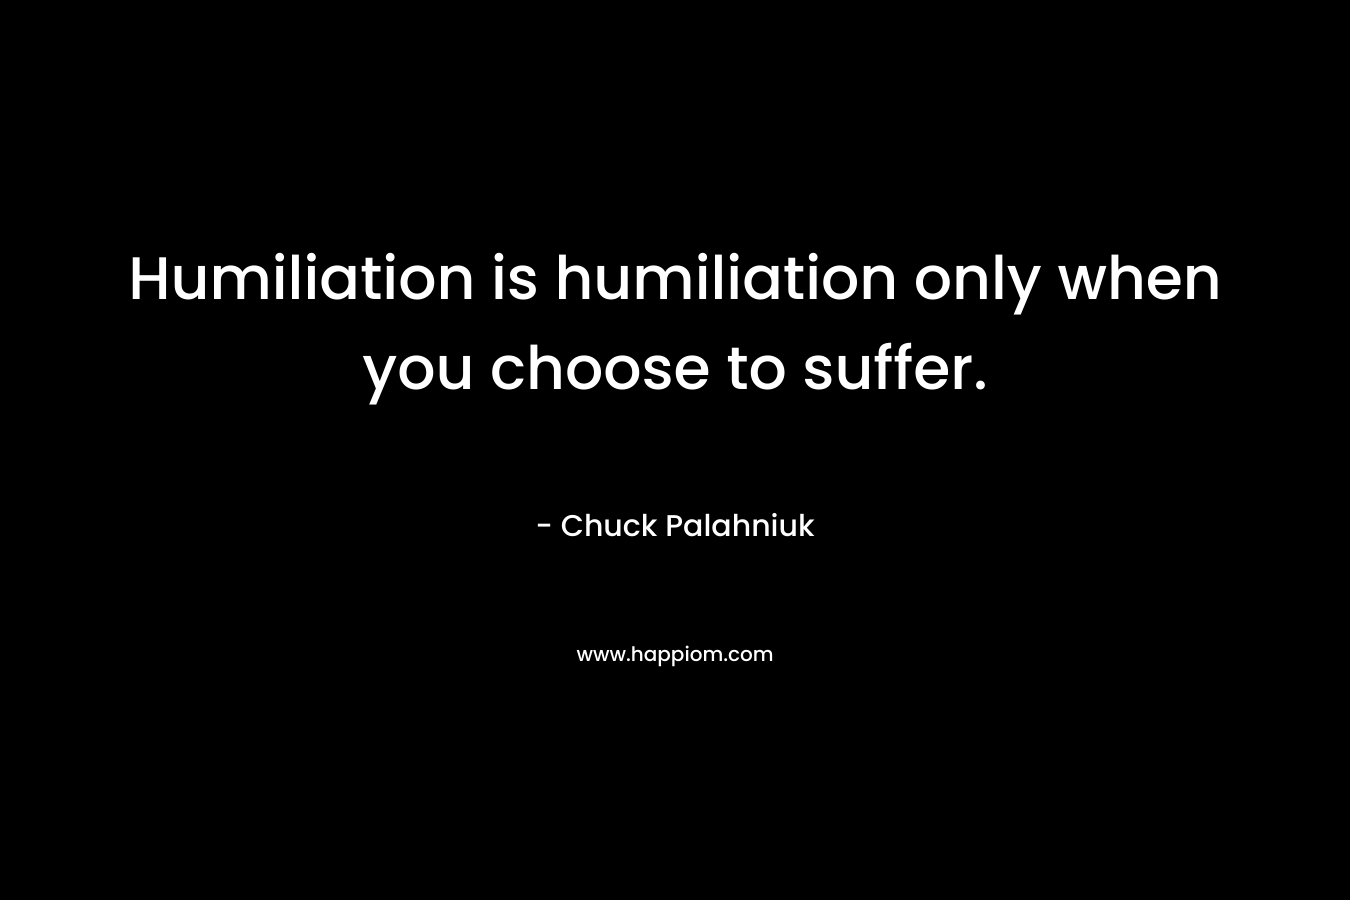 Humiliation is humiliation only when you choose to suffer.